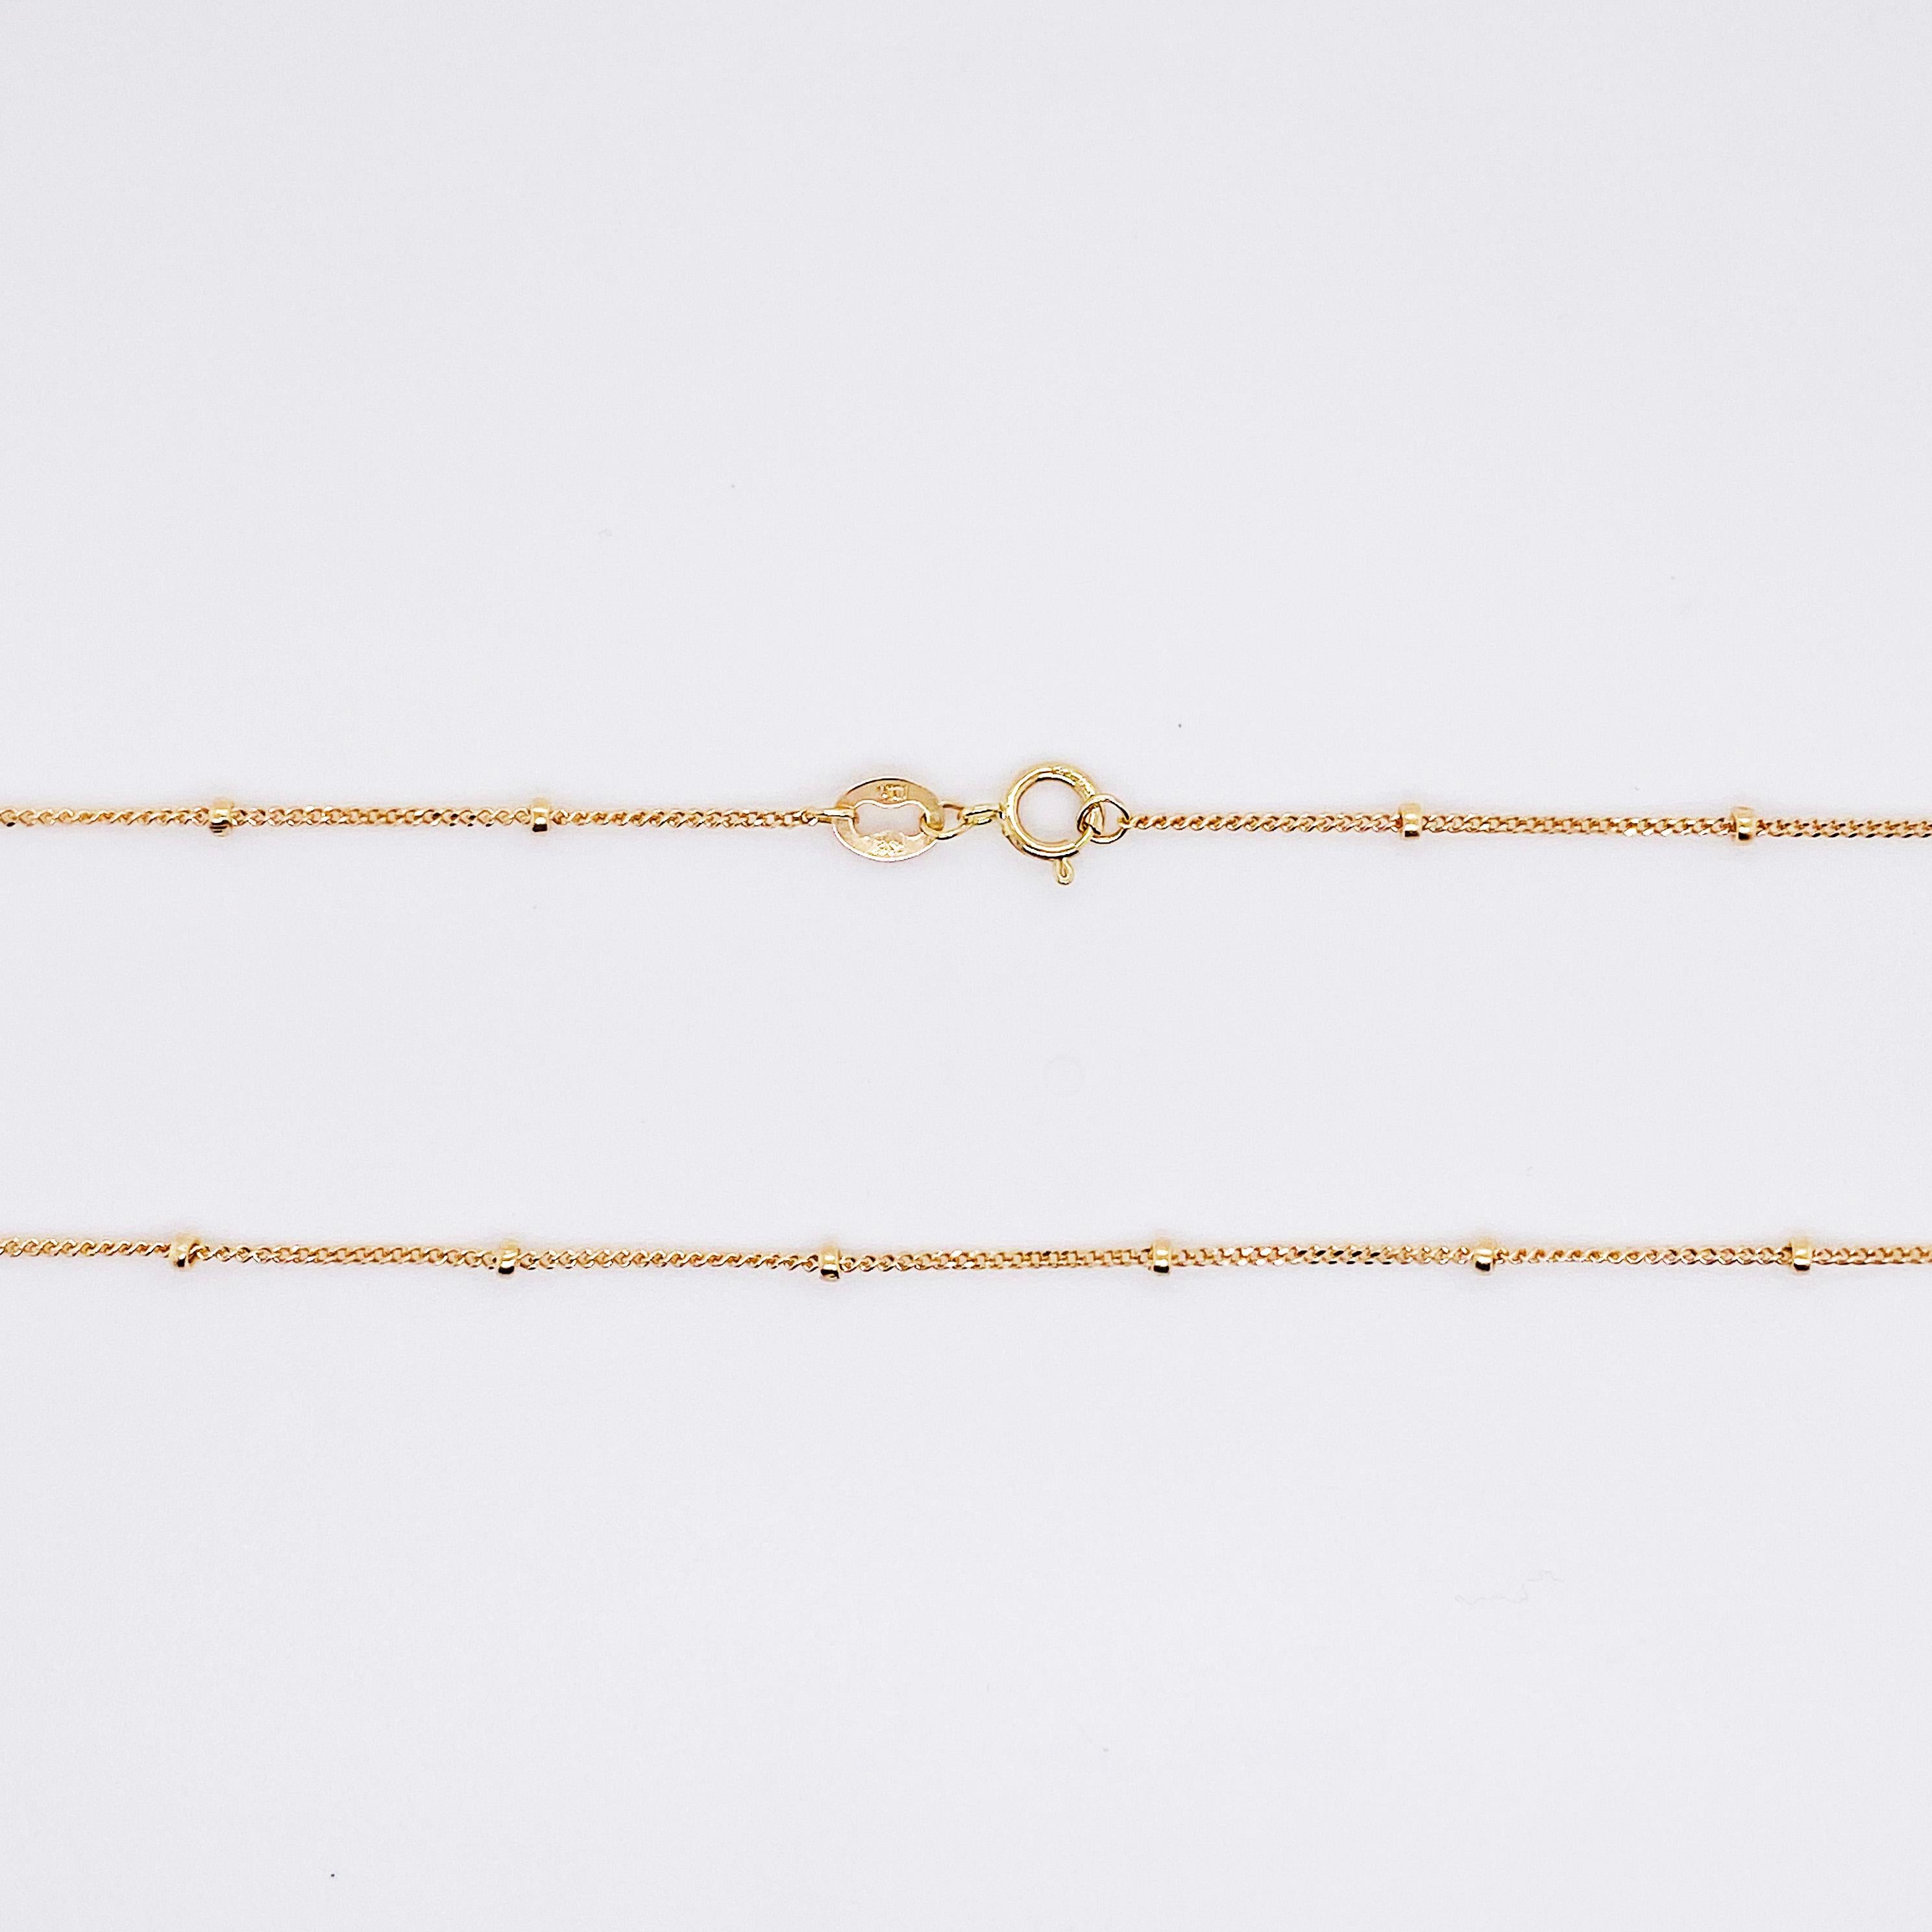 This is our best selling 14 karat gold chain because it is so versital and can be worn alone or with other chains.  There is a gold bead every inch and the chain in between is a durable cable style.  The chain is in rich 14 karat yellow gold but you